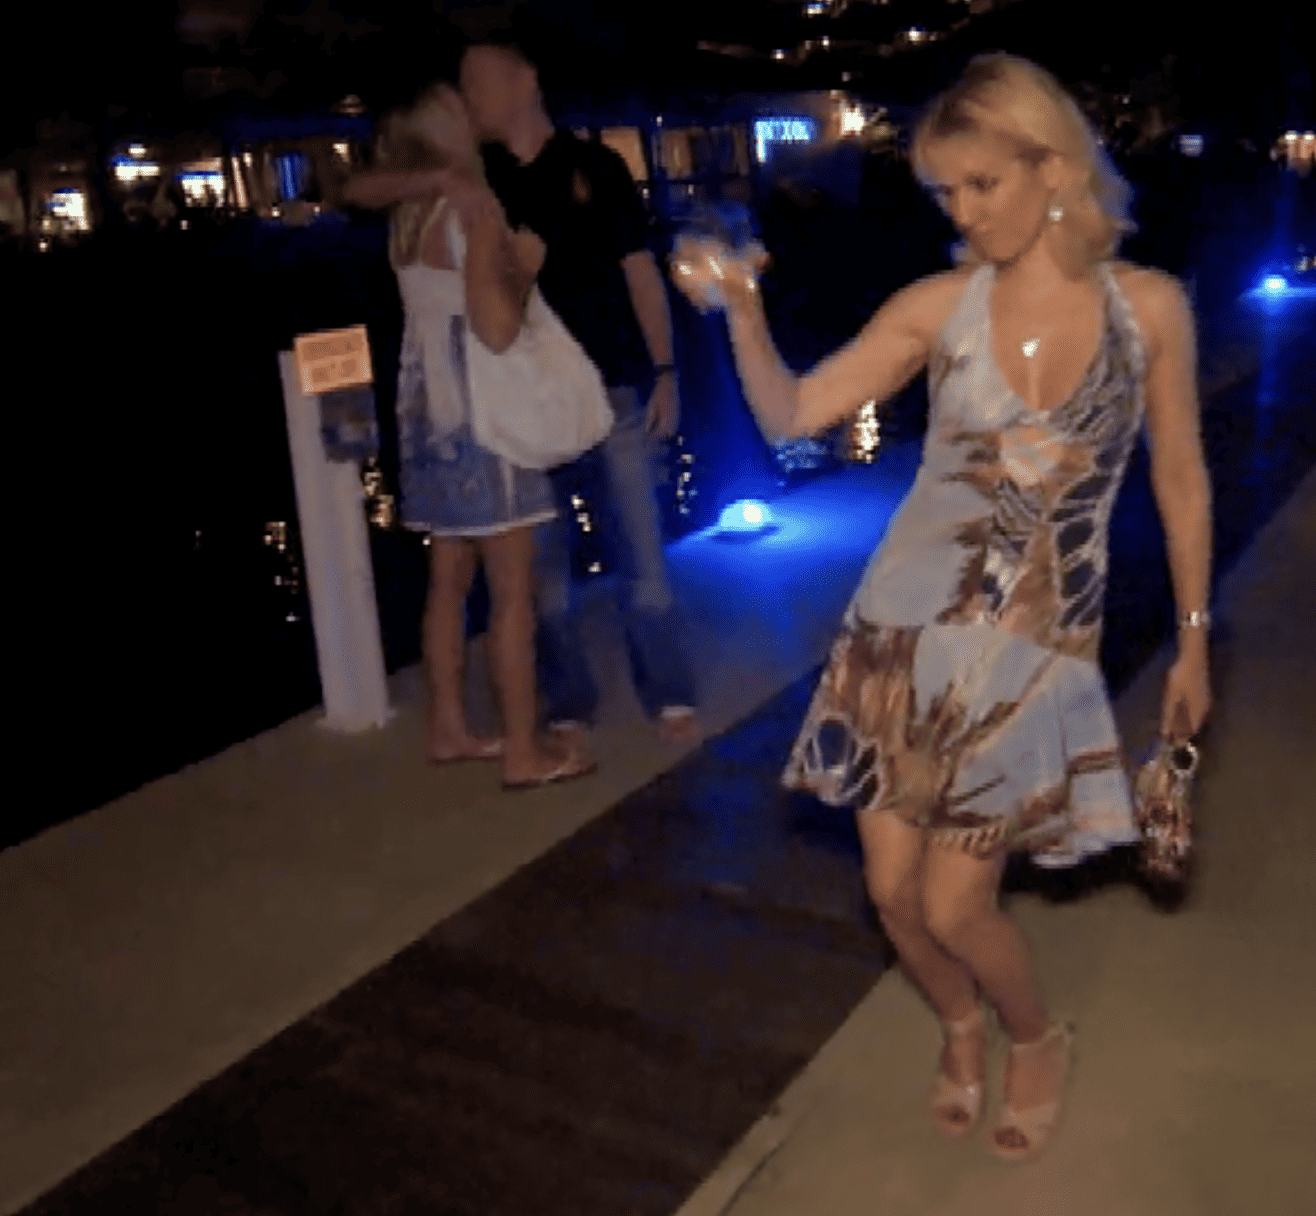  A woman with blond hair holding her purse and a glass of wine dances on the pier in this image from Shed Entertainment.